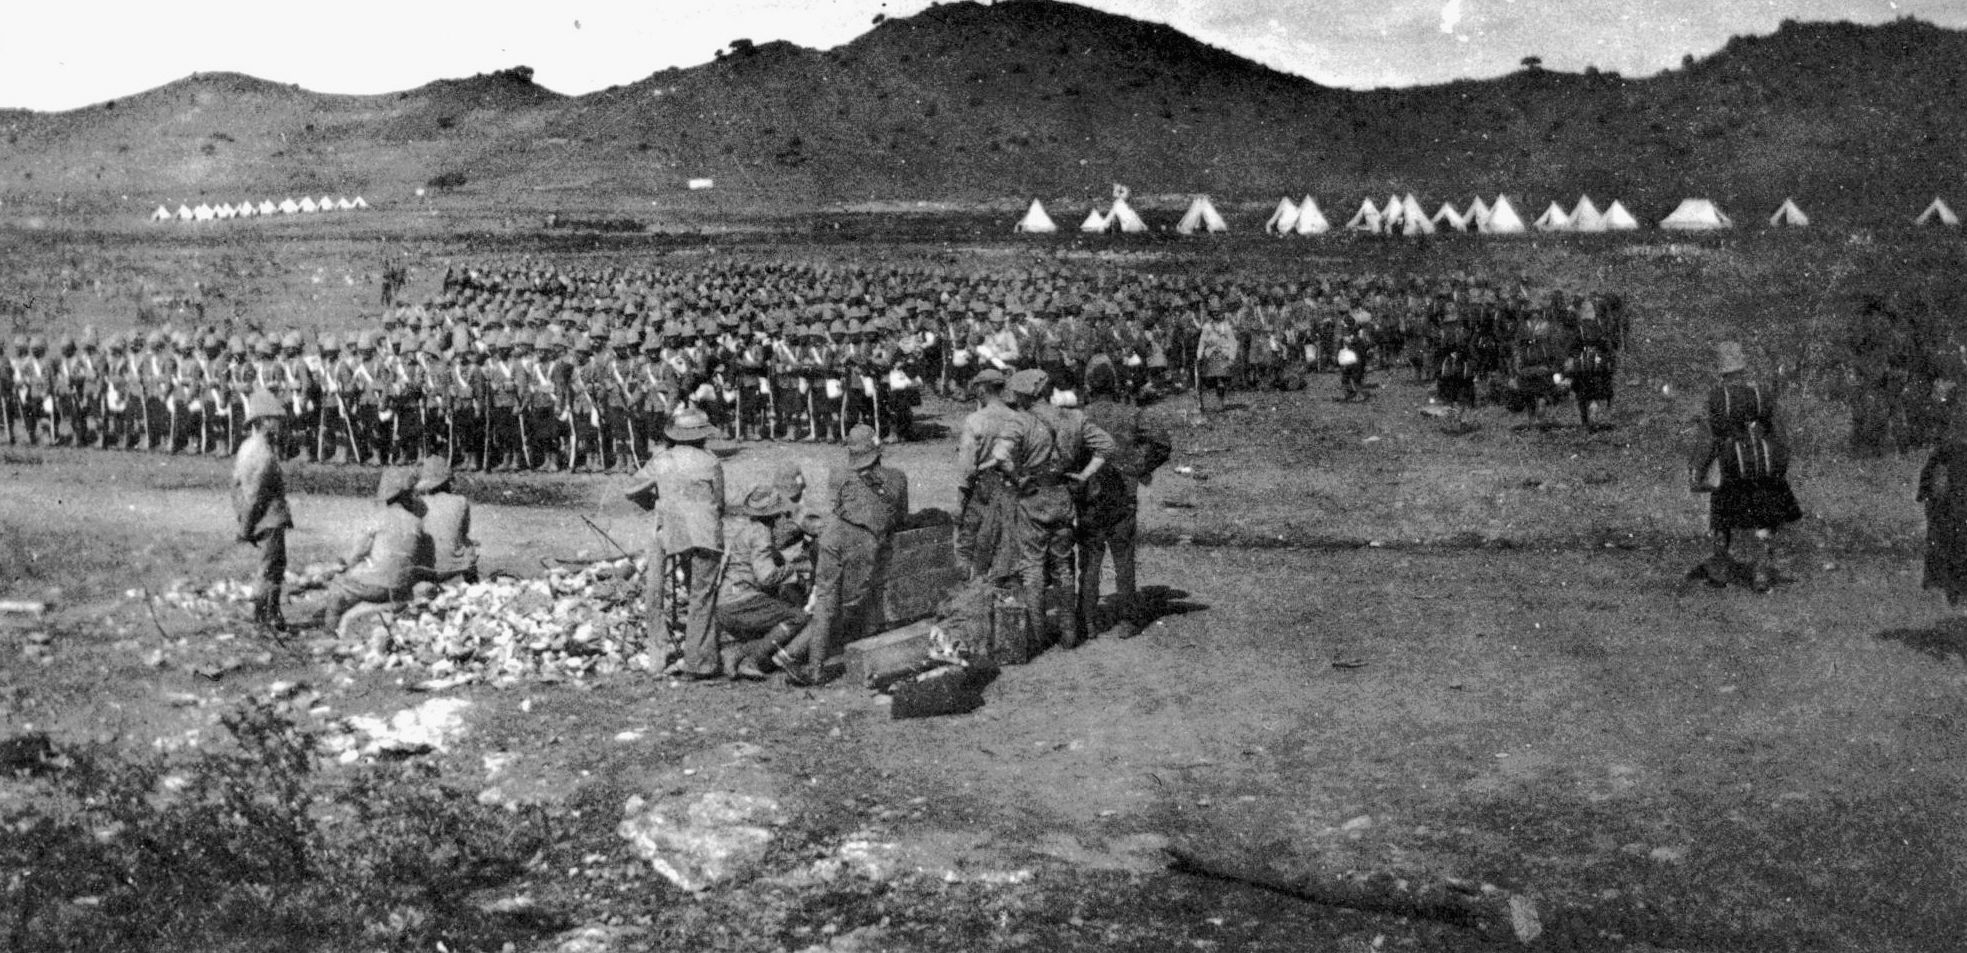 The Royal Canadian Regiment camp at De Aar, South Africa, in 1900.